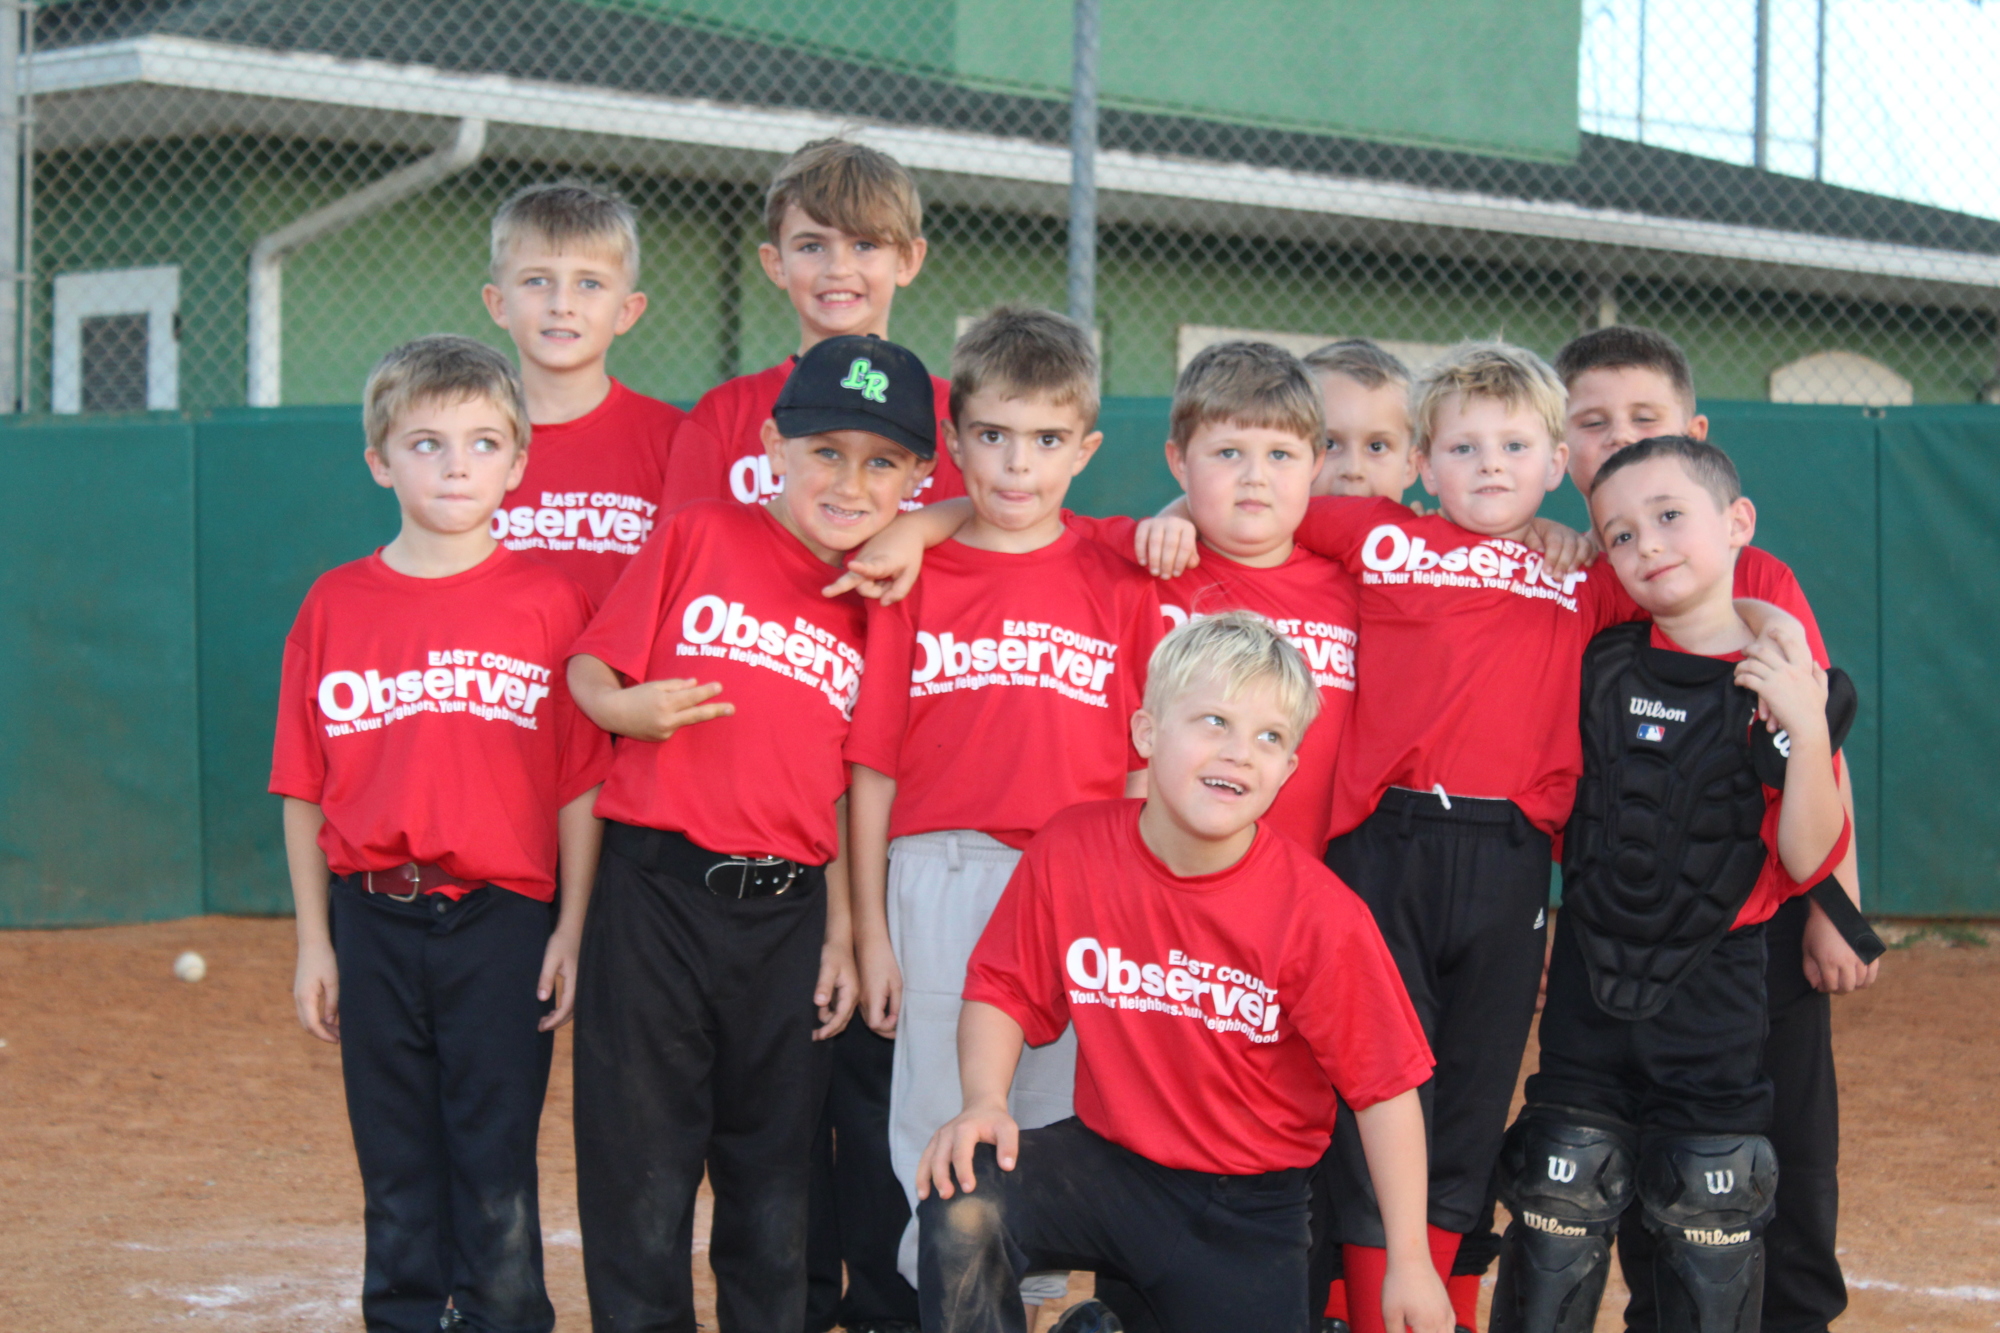 The East County Observer Little League team includes Cameron Cody (front), who has Down syndrome.